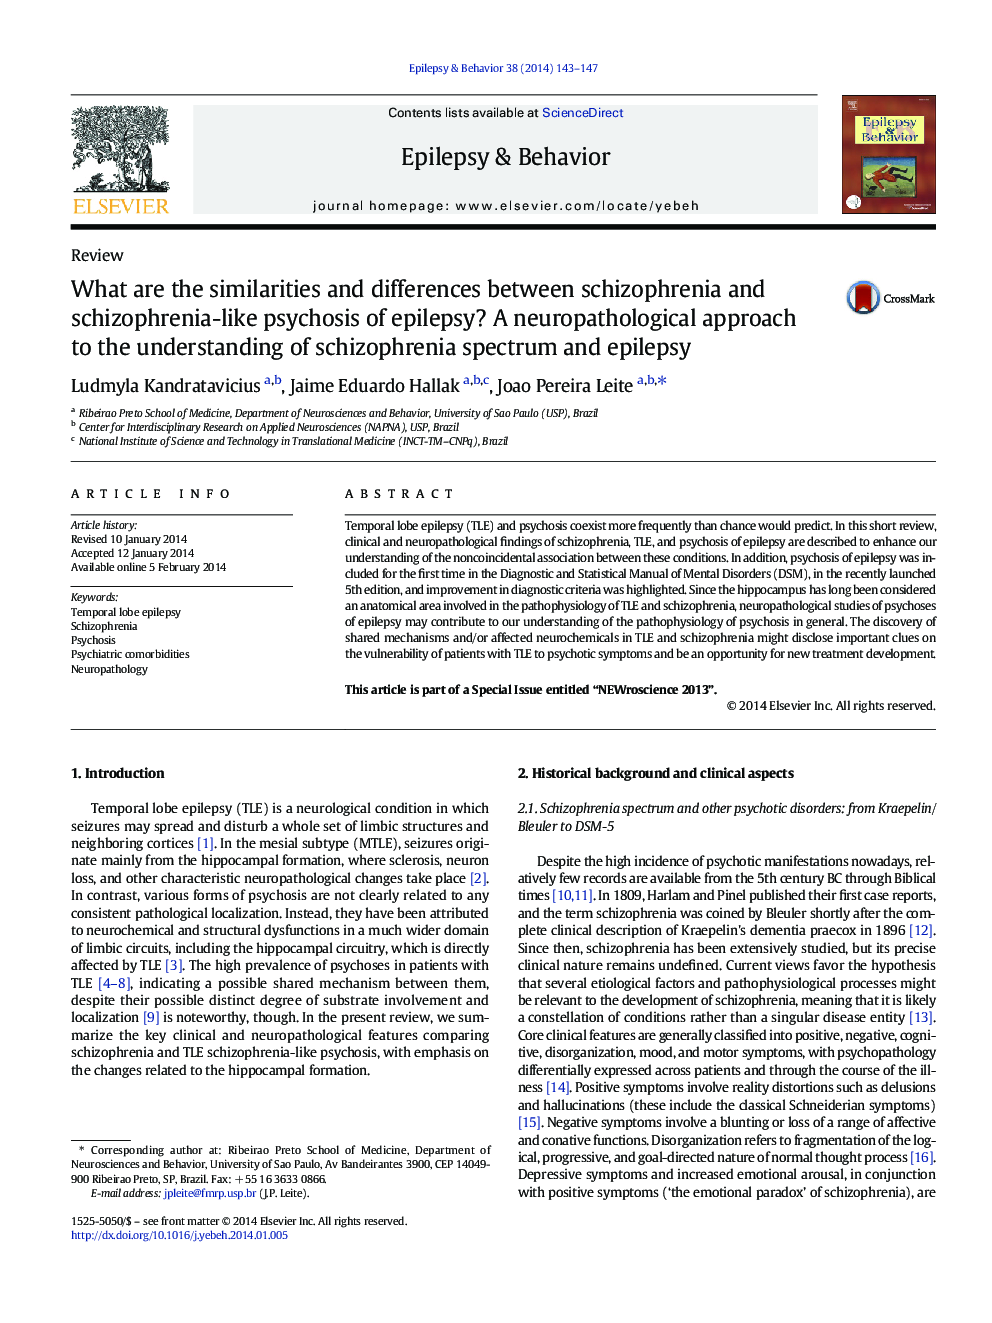 ReviewWhat are the similarities and differences between schizophrenia and schizophrenia-like psychosis of epilepsy? A neuropathological approach to the understanding of schizophrenia spectrum and epilepsy